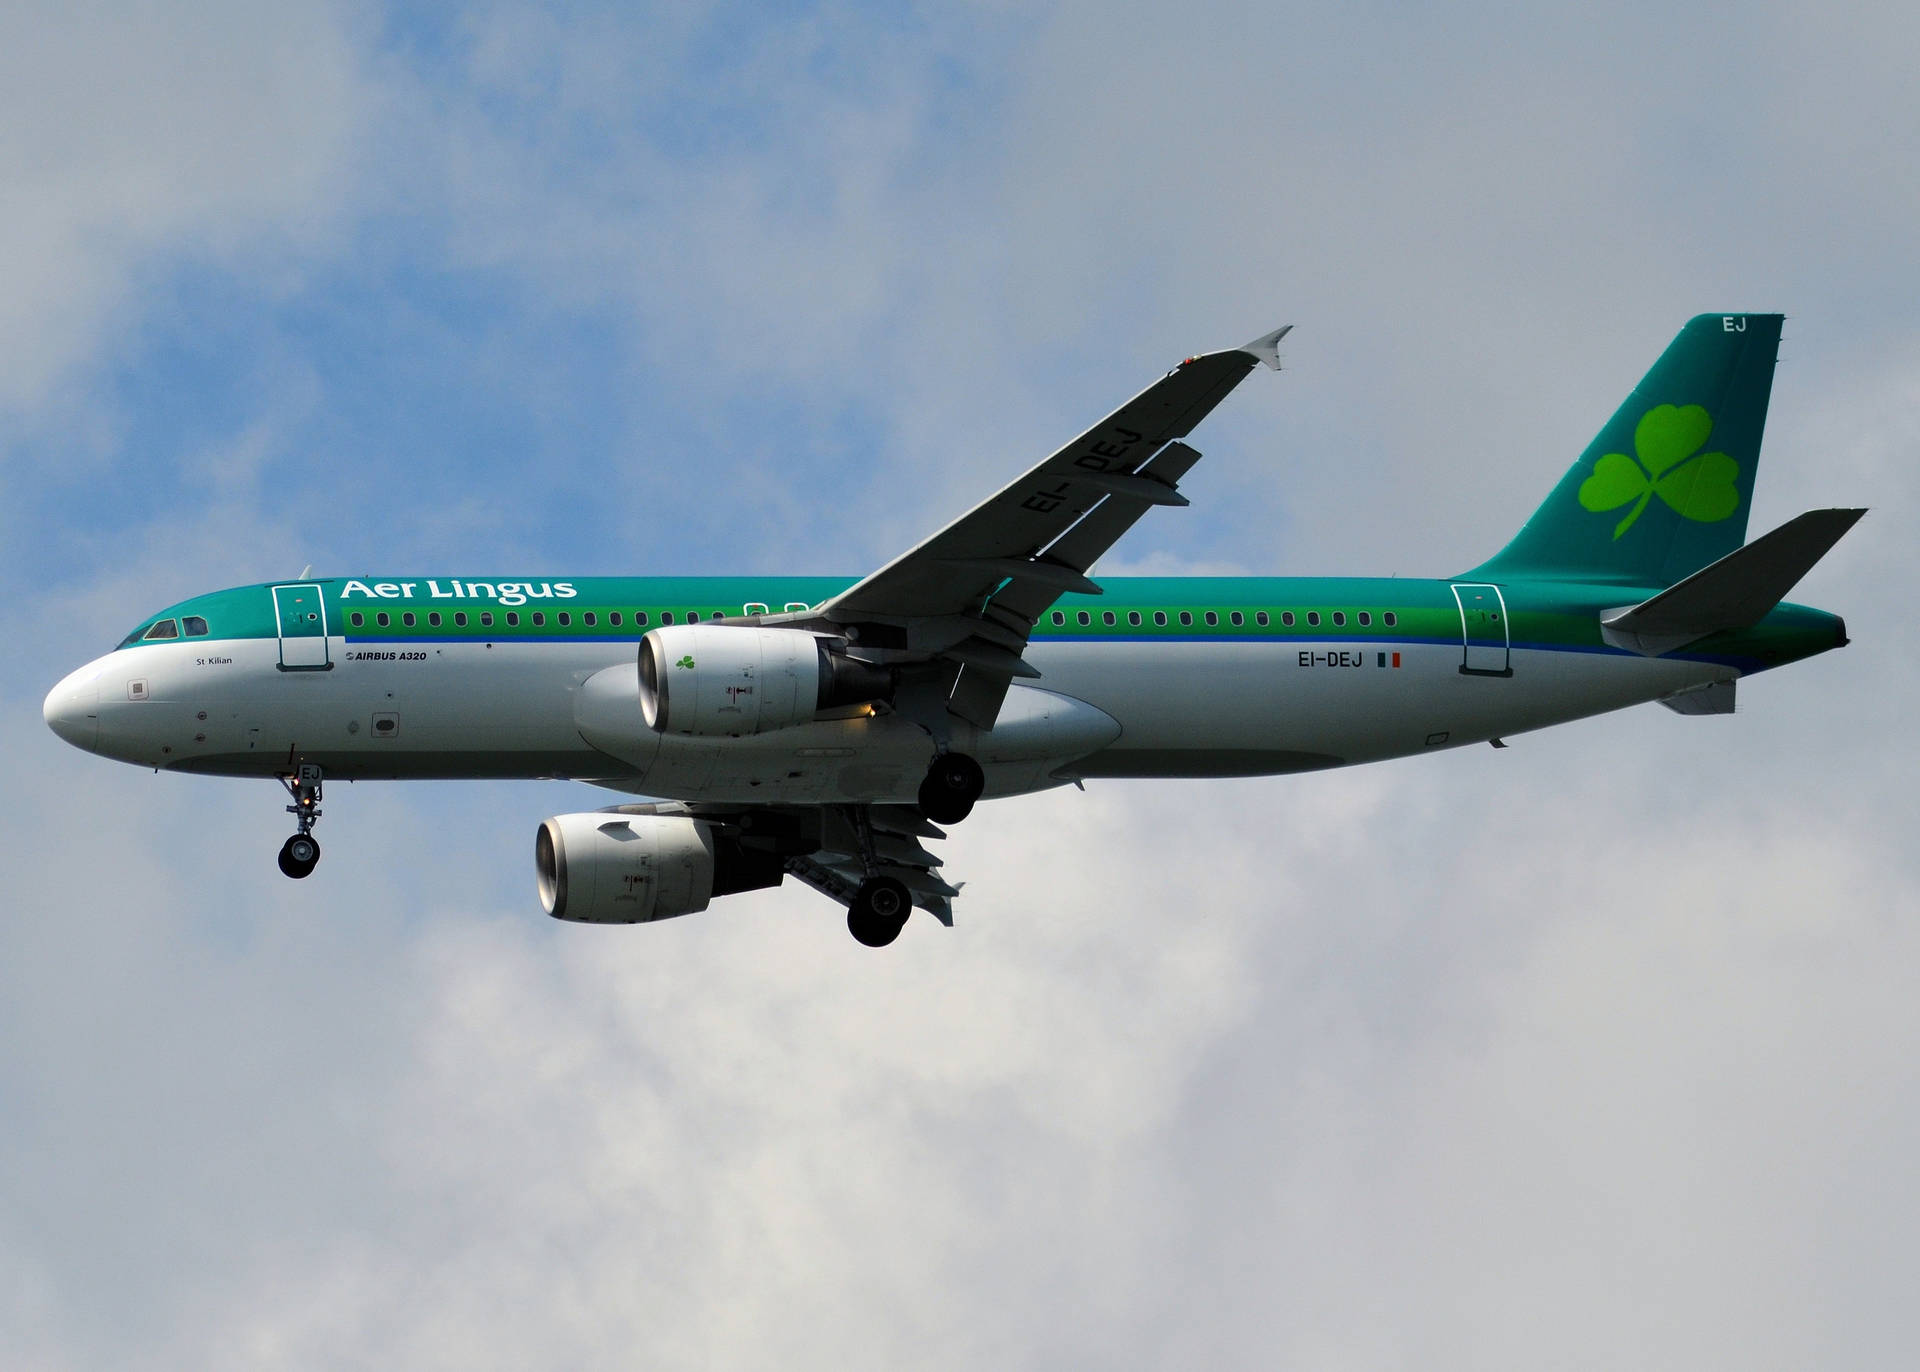 Soaring Aer Lingus Airplane Picture